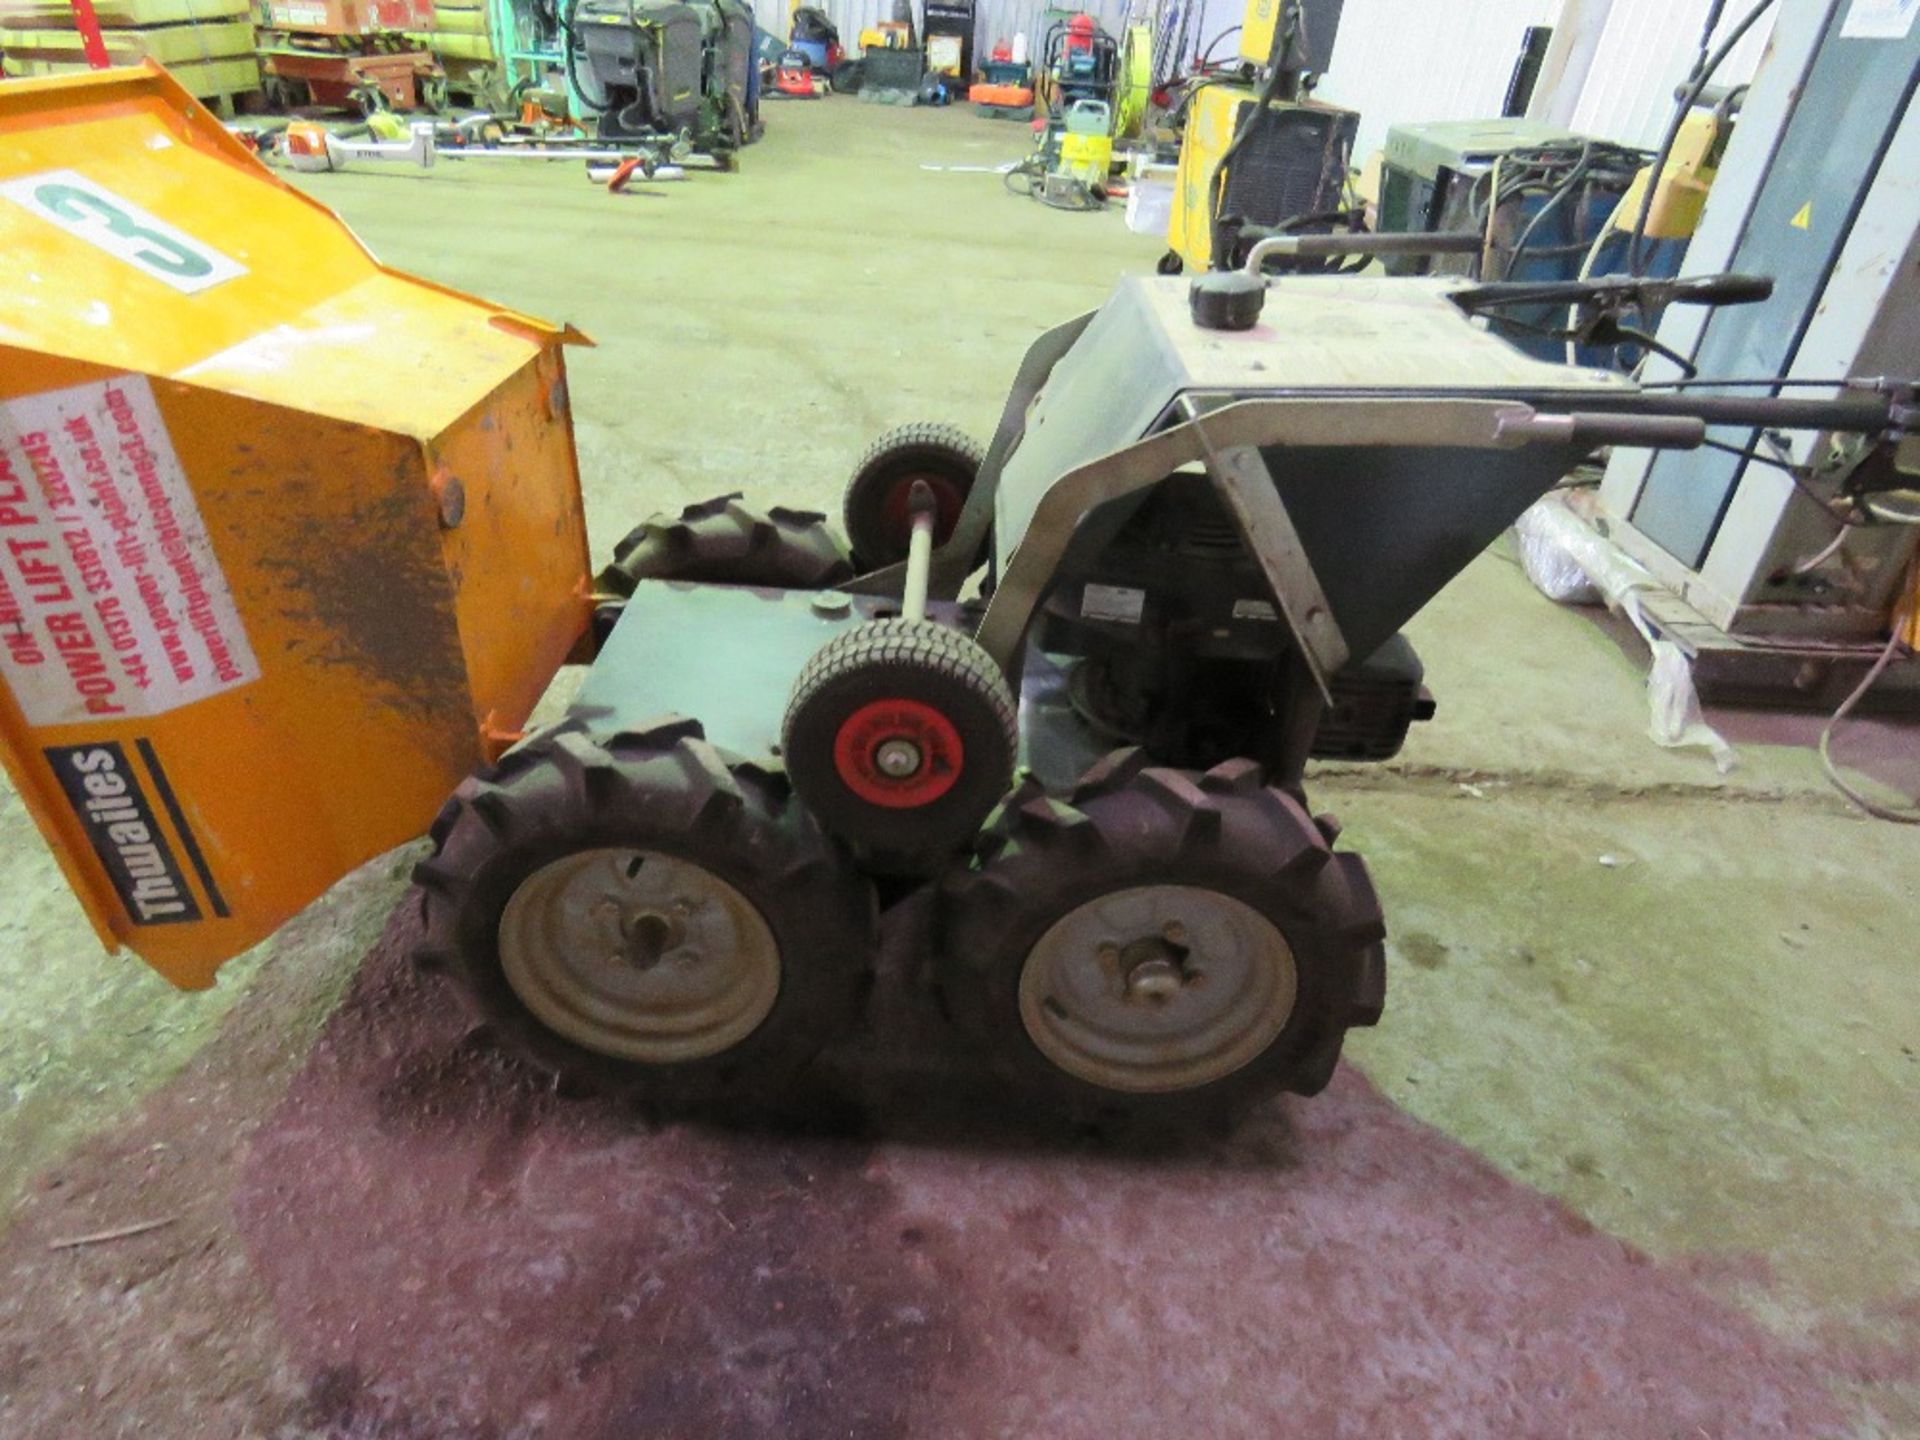 THWAITES PETROL ENGINED POWER BARROW, YEAR 2016BUILD. WHEN TESTED WAS SEEN TO START, RUN AND DRIVE. - Image 2 of 4